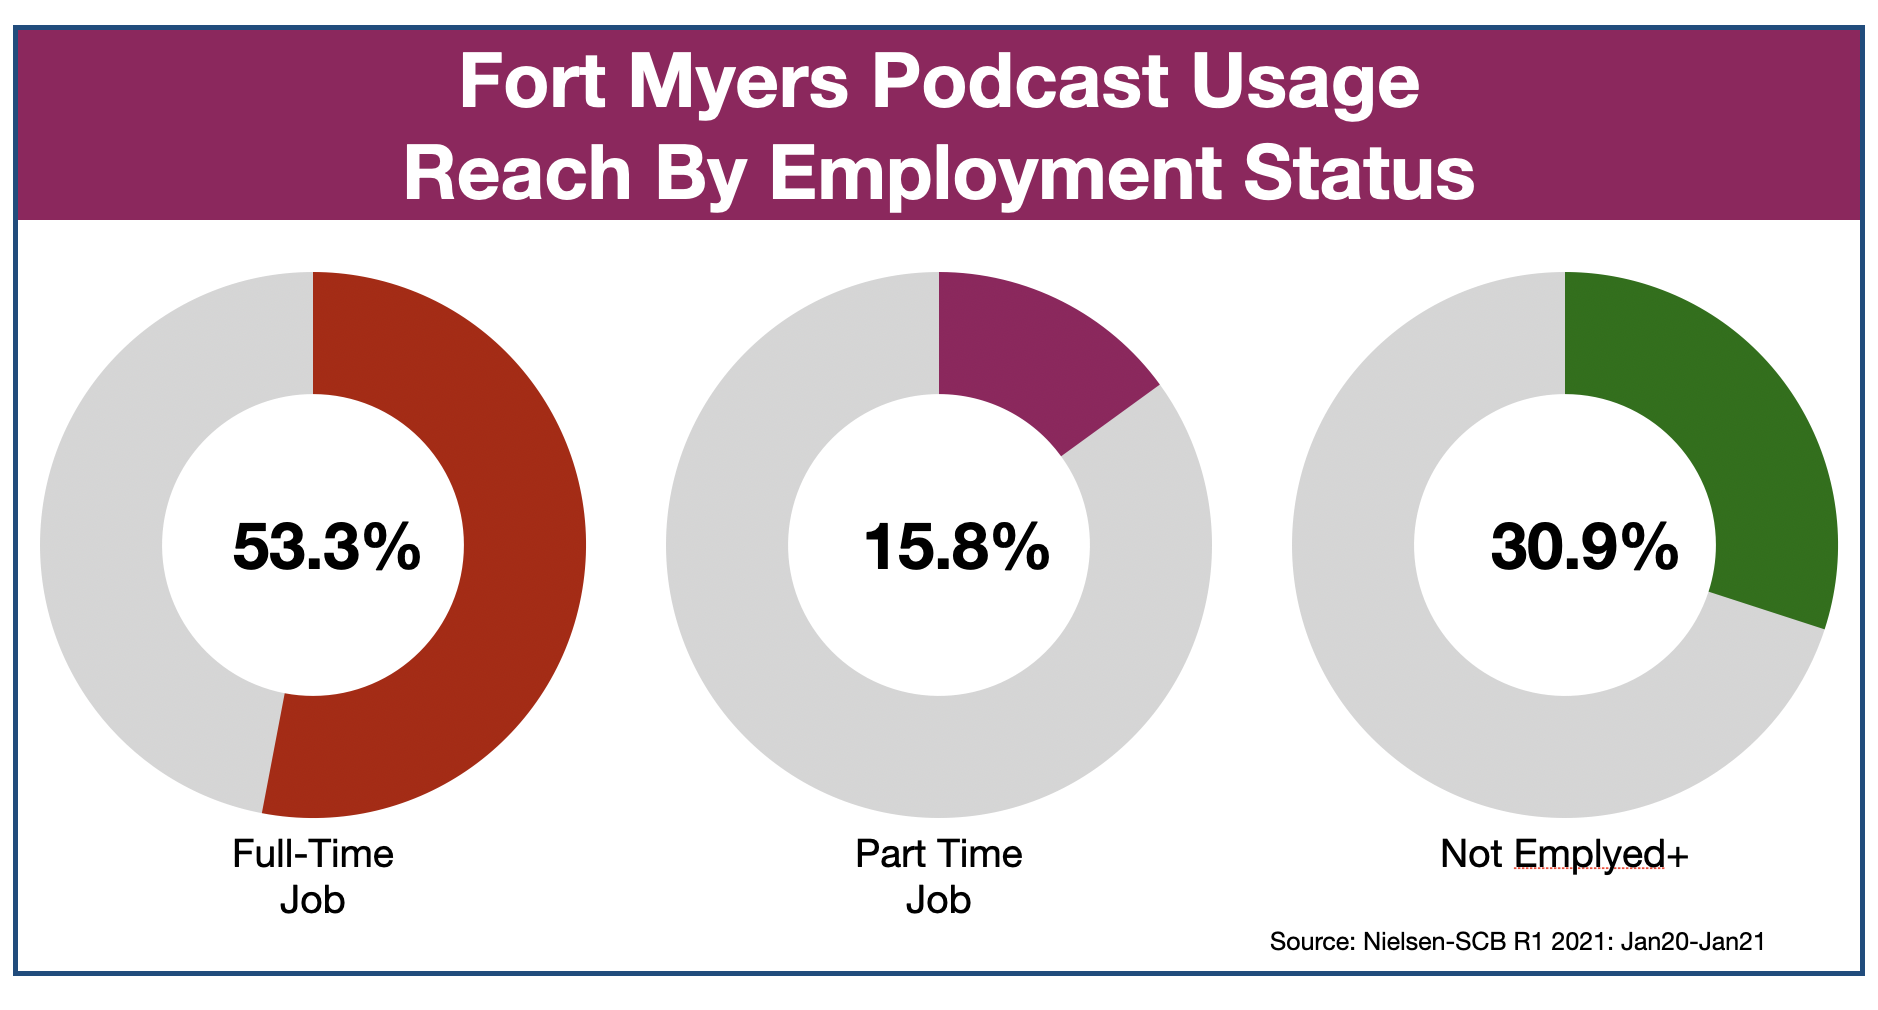 Podcast Advertising In Fort Myers Employment